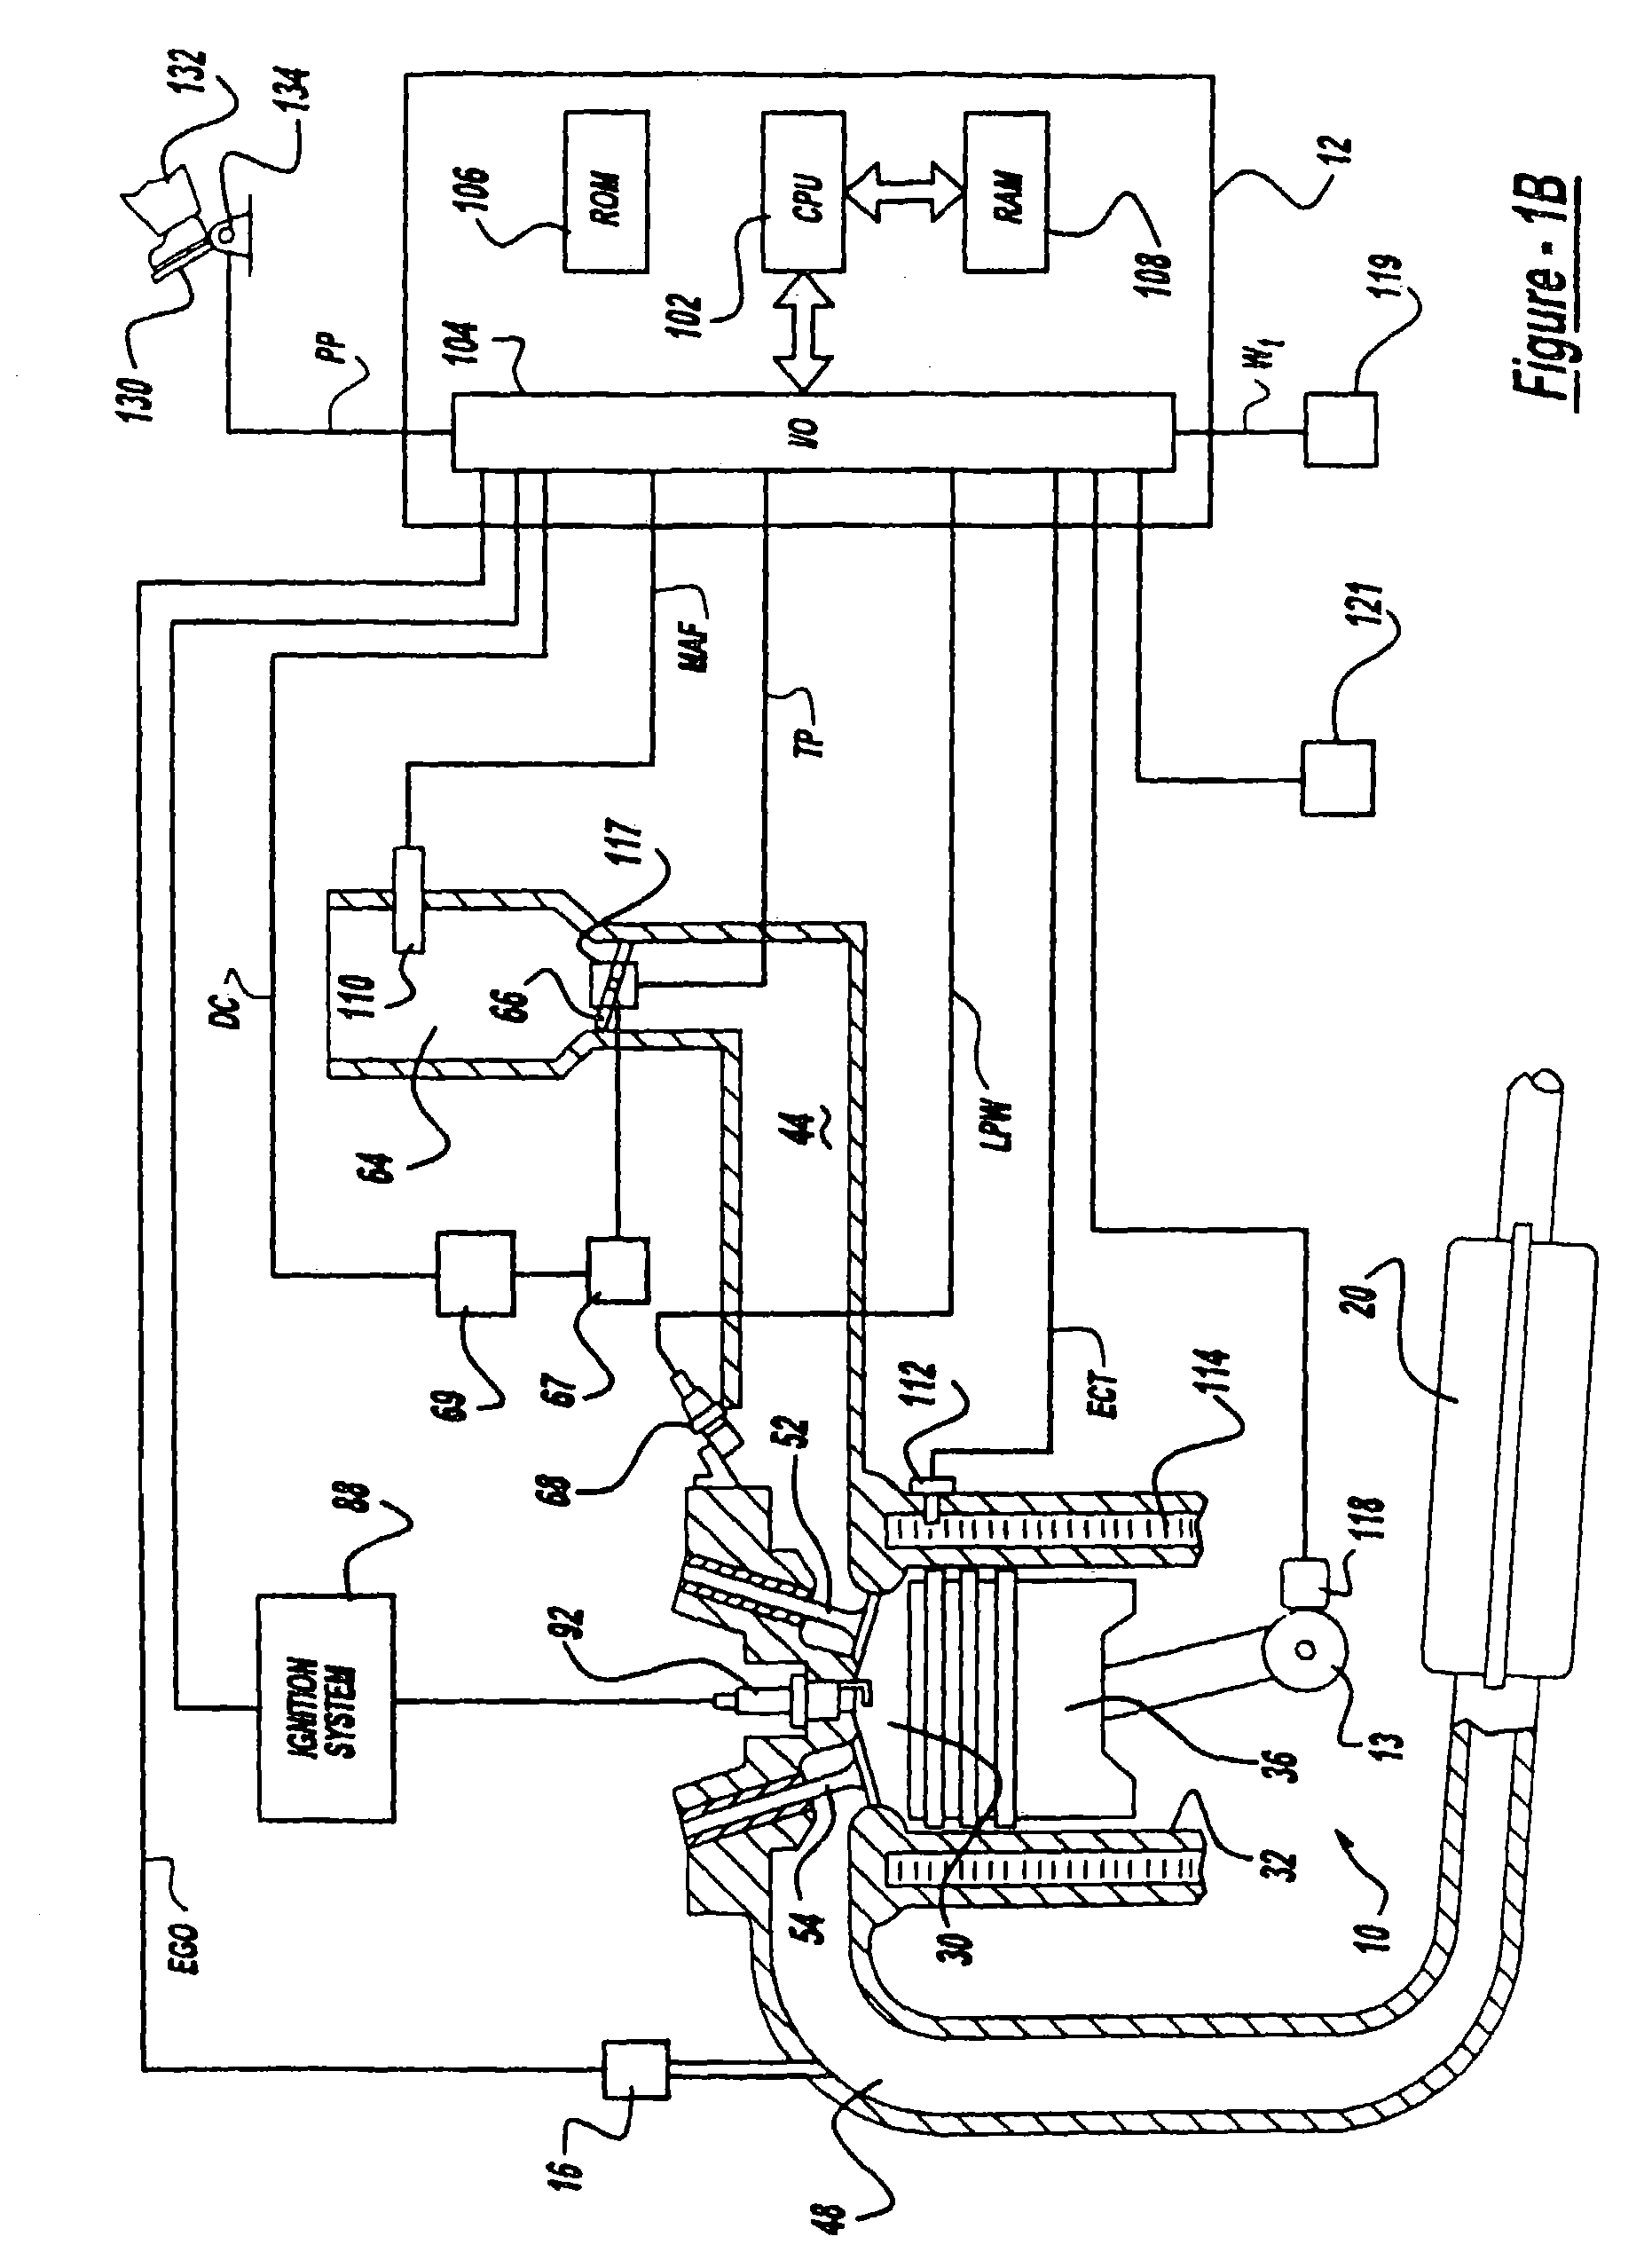 Control method for a vehicle having an engine and an accessory device